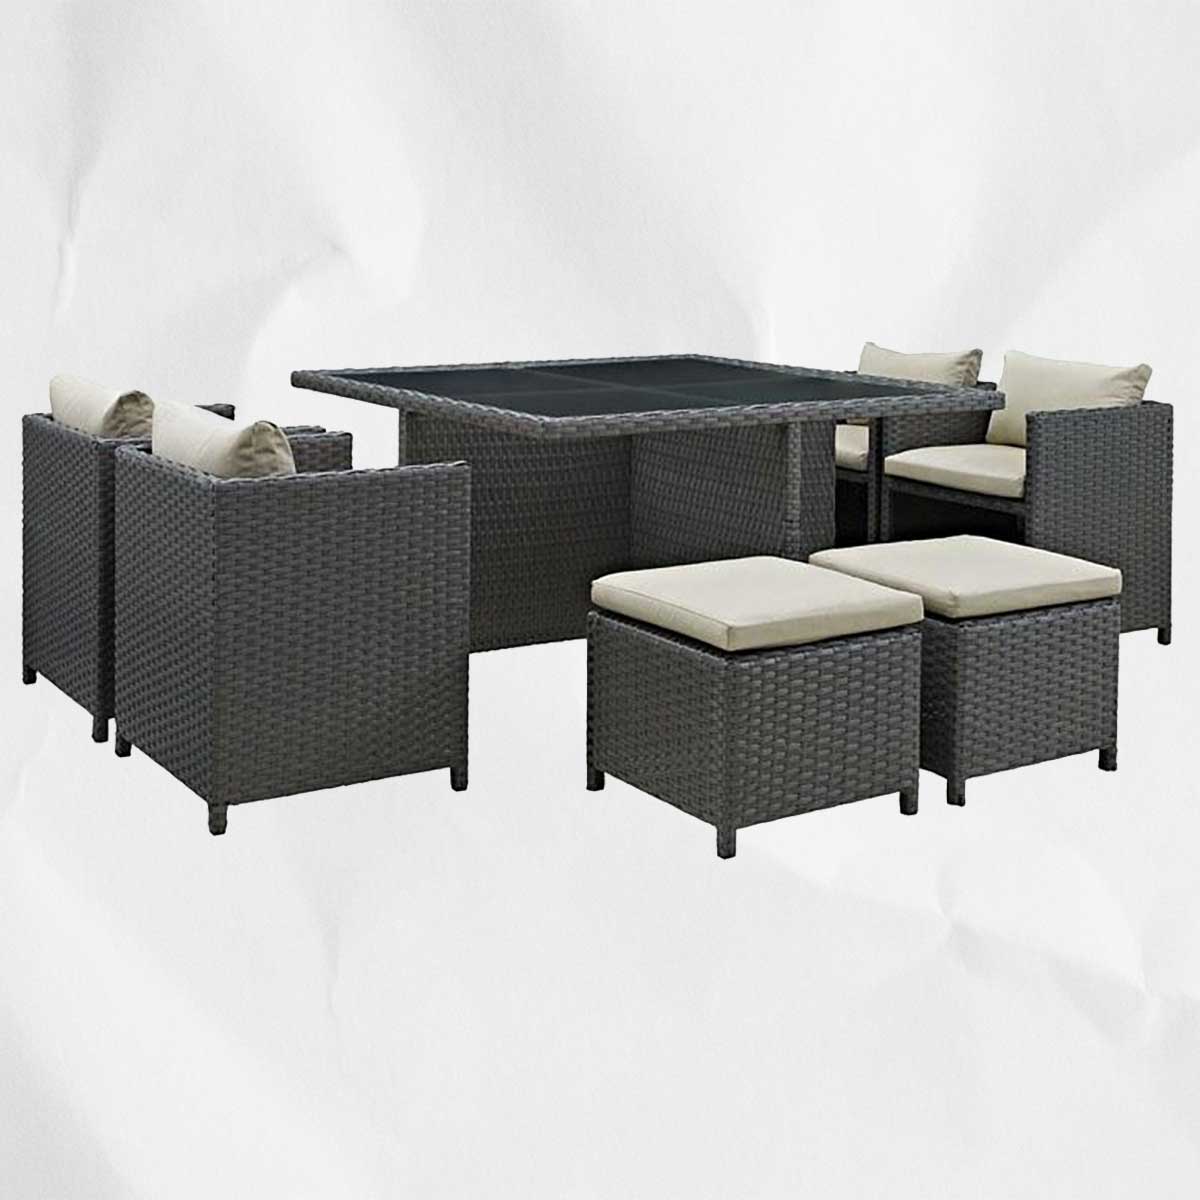 A Sojourn 9-Piece outdoor patio set.